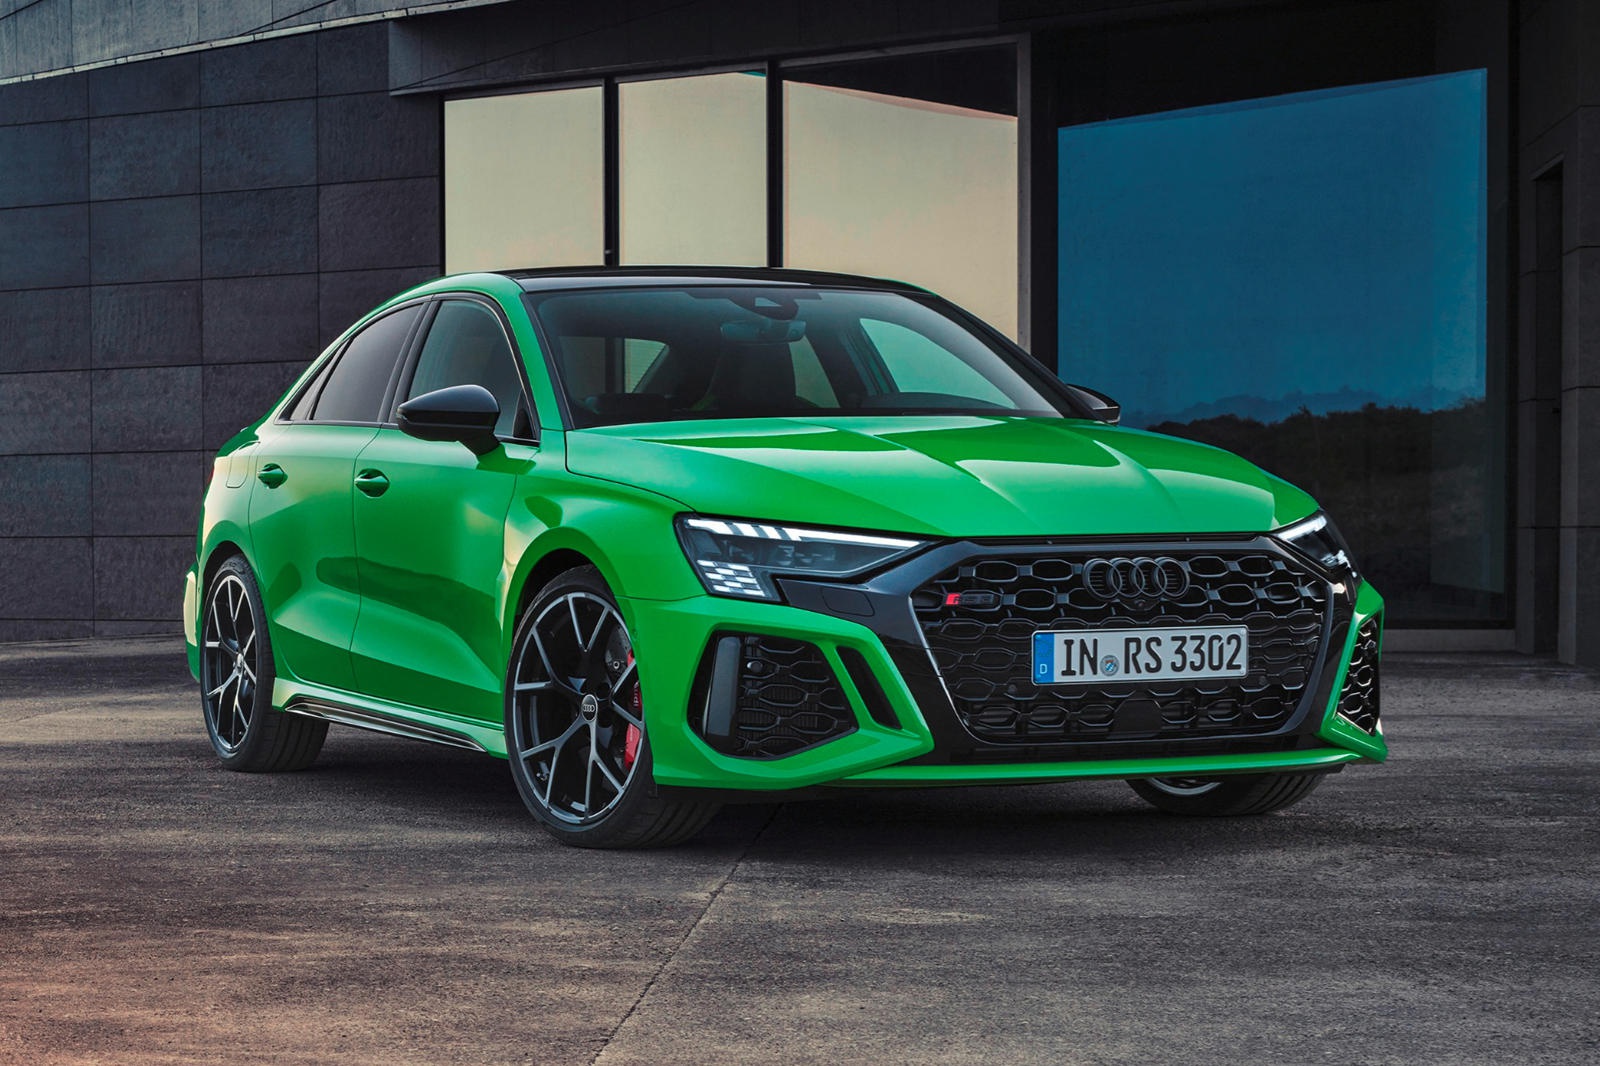 audi,  rs3,  rs 3,  audi rs3,  audi rs 3,  rs3 2022,  rs 3 2022,  rs3 sedan,  rs 3 sedan,  rs3 sportback,  rs 3 sportback,  audi rs3 sedan,  audi rs 3 sportback anh 1